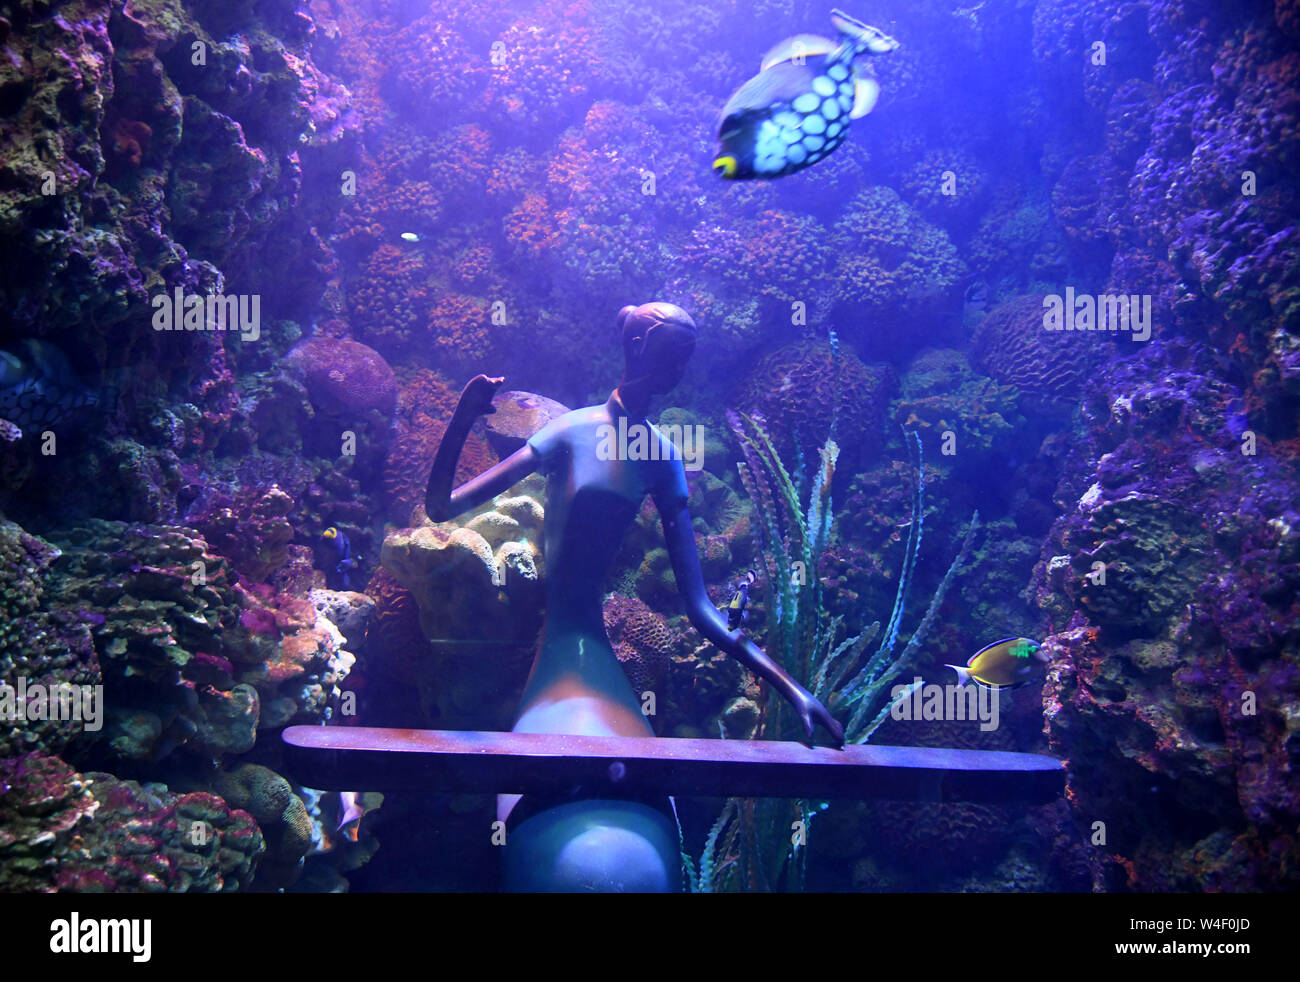 Qingdao. 22nd July, 2019. Photo taken on July 22, 2019 shows a statue in the shape of folk music performer in an aquarium of an ocean park in Qingdao, east China's Shandong Province. A dozen statues showing various Chinese folk music playing scenes are installed underwater in aquariums at the ocean park, which provides a fresh audio-visual enjoyment to visitors amid melodious folk music. Credit: Li Ziheng/Xinhua/Alamy Live News Stock Photo